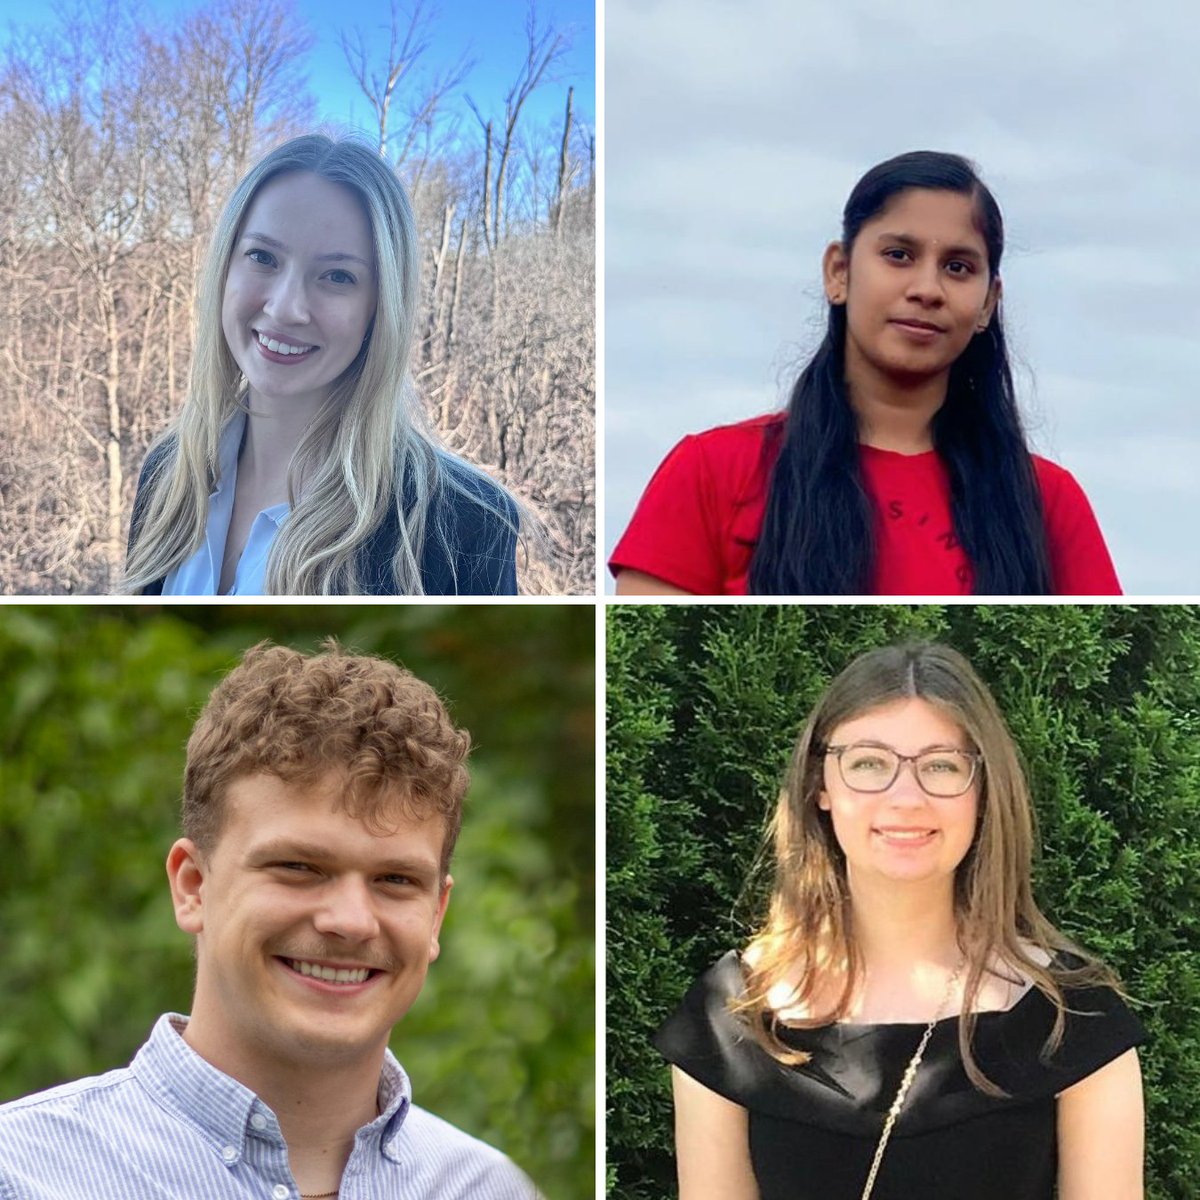 Four students will each receive $17,500 entrance scholarships from @VectorInst to pursue graduate studies in artificial intelligence at @uofg this fall. Learn more about the Vector Scholarships in AI and this year's U of G recipients: uoguelph.ca/ceps/uofg-vsai… @uofgGradStudies